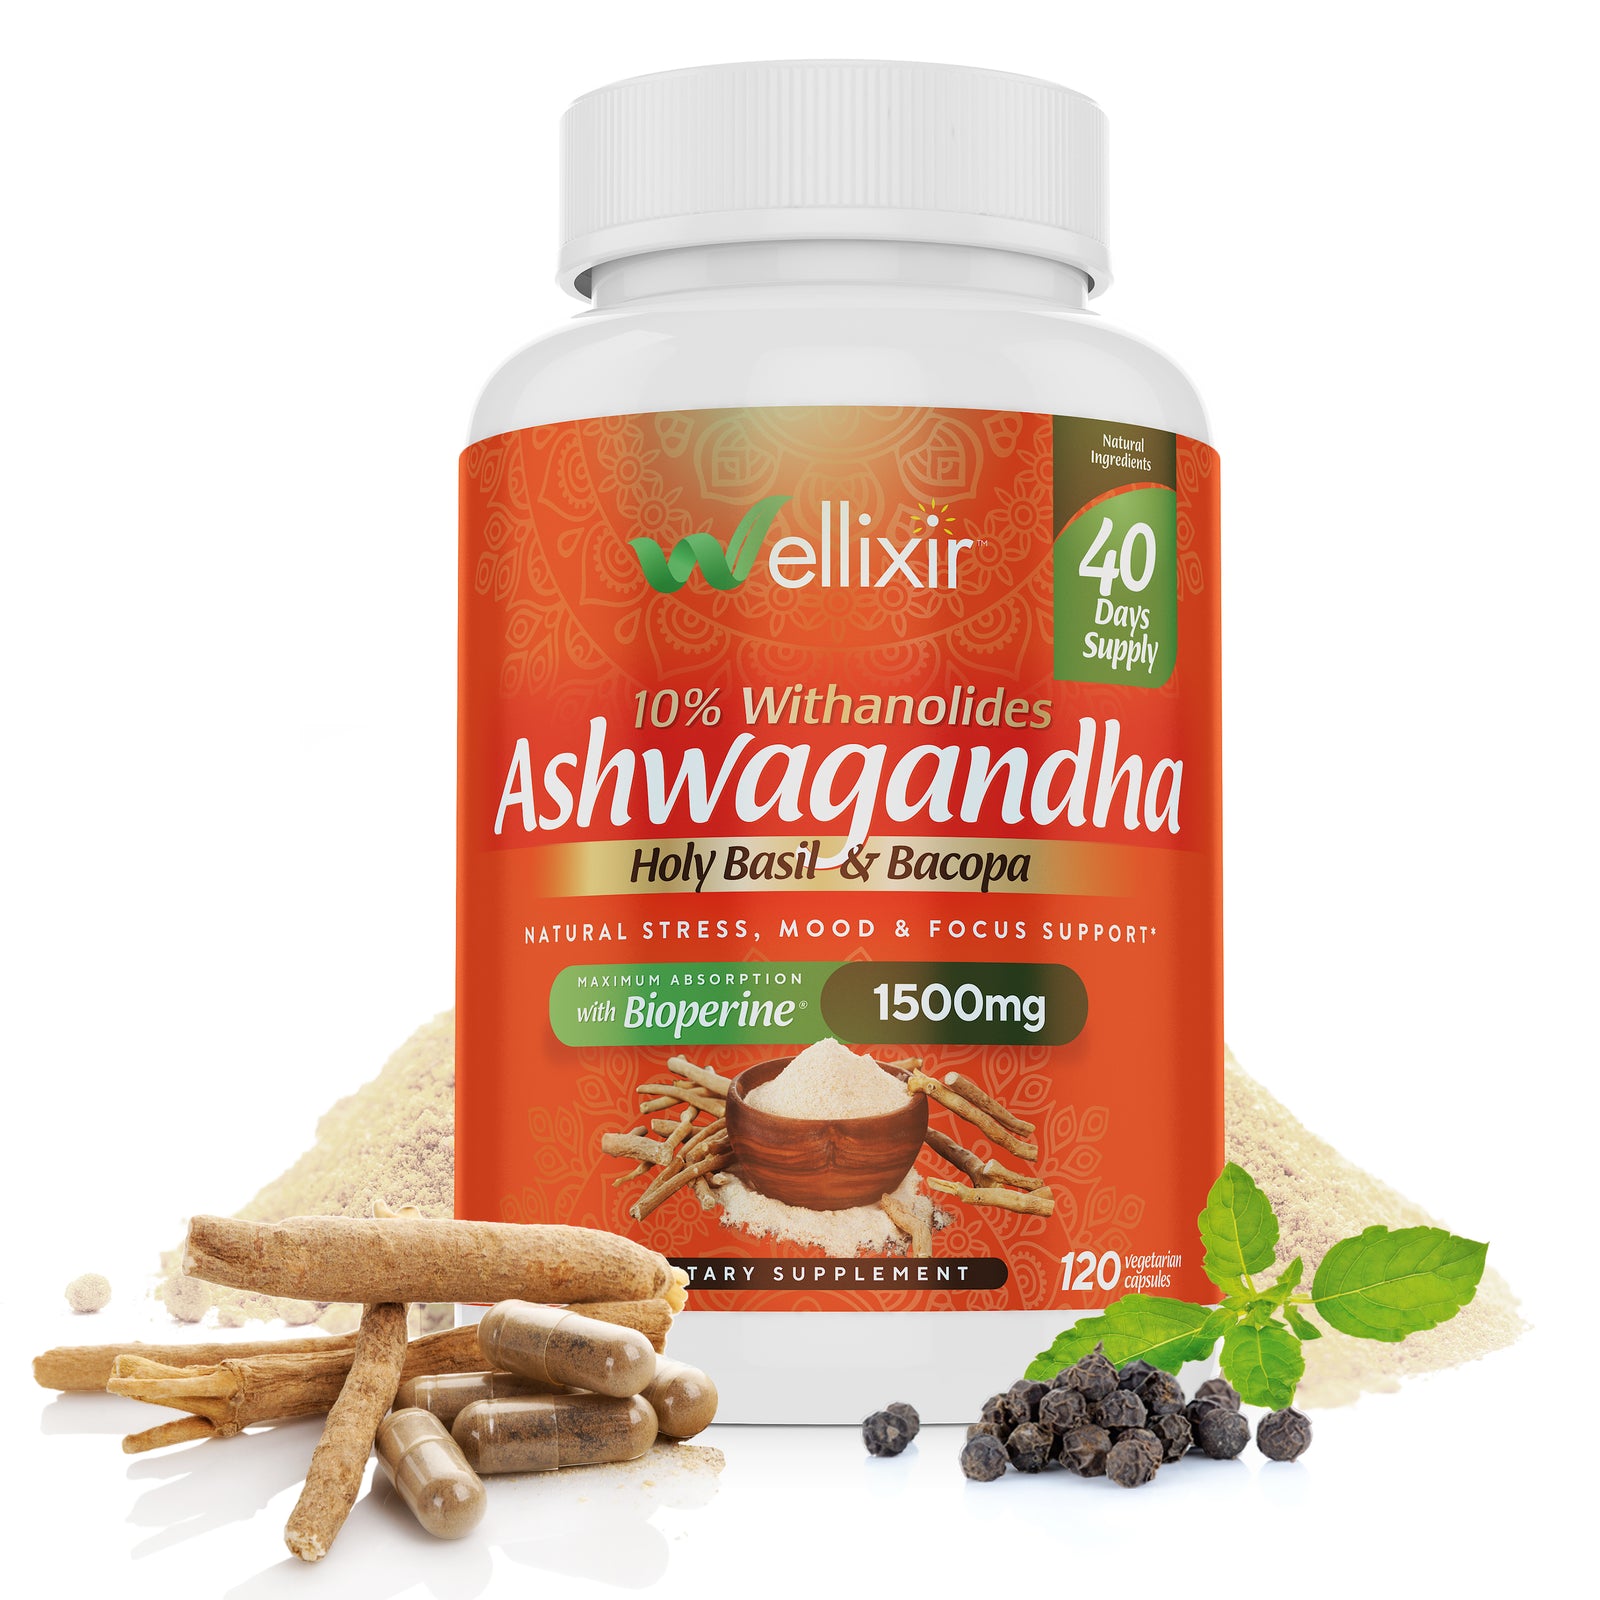 Wellixir Pure Ashwagandha Capsules - Root Powder Supplement, 10% Withanolides with Bacopa Extract & Holy Basil - Vegan & Gluten-Free Herbal Supplements for Stress, Mood Support - 1500mg, 120 Count